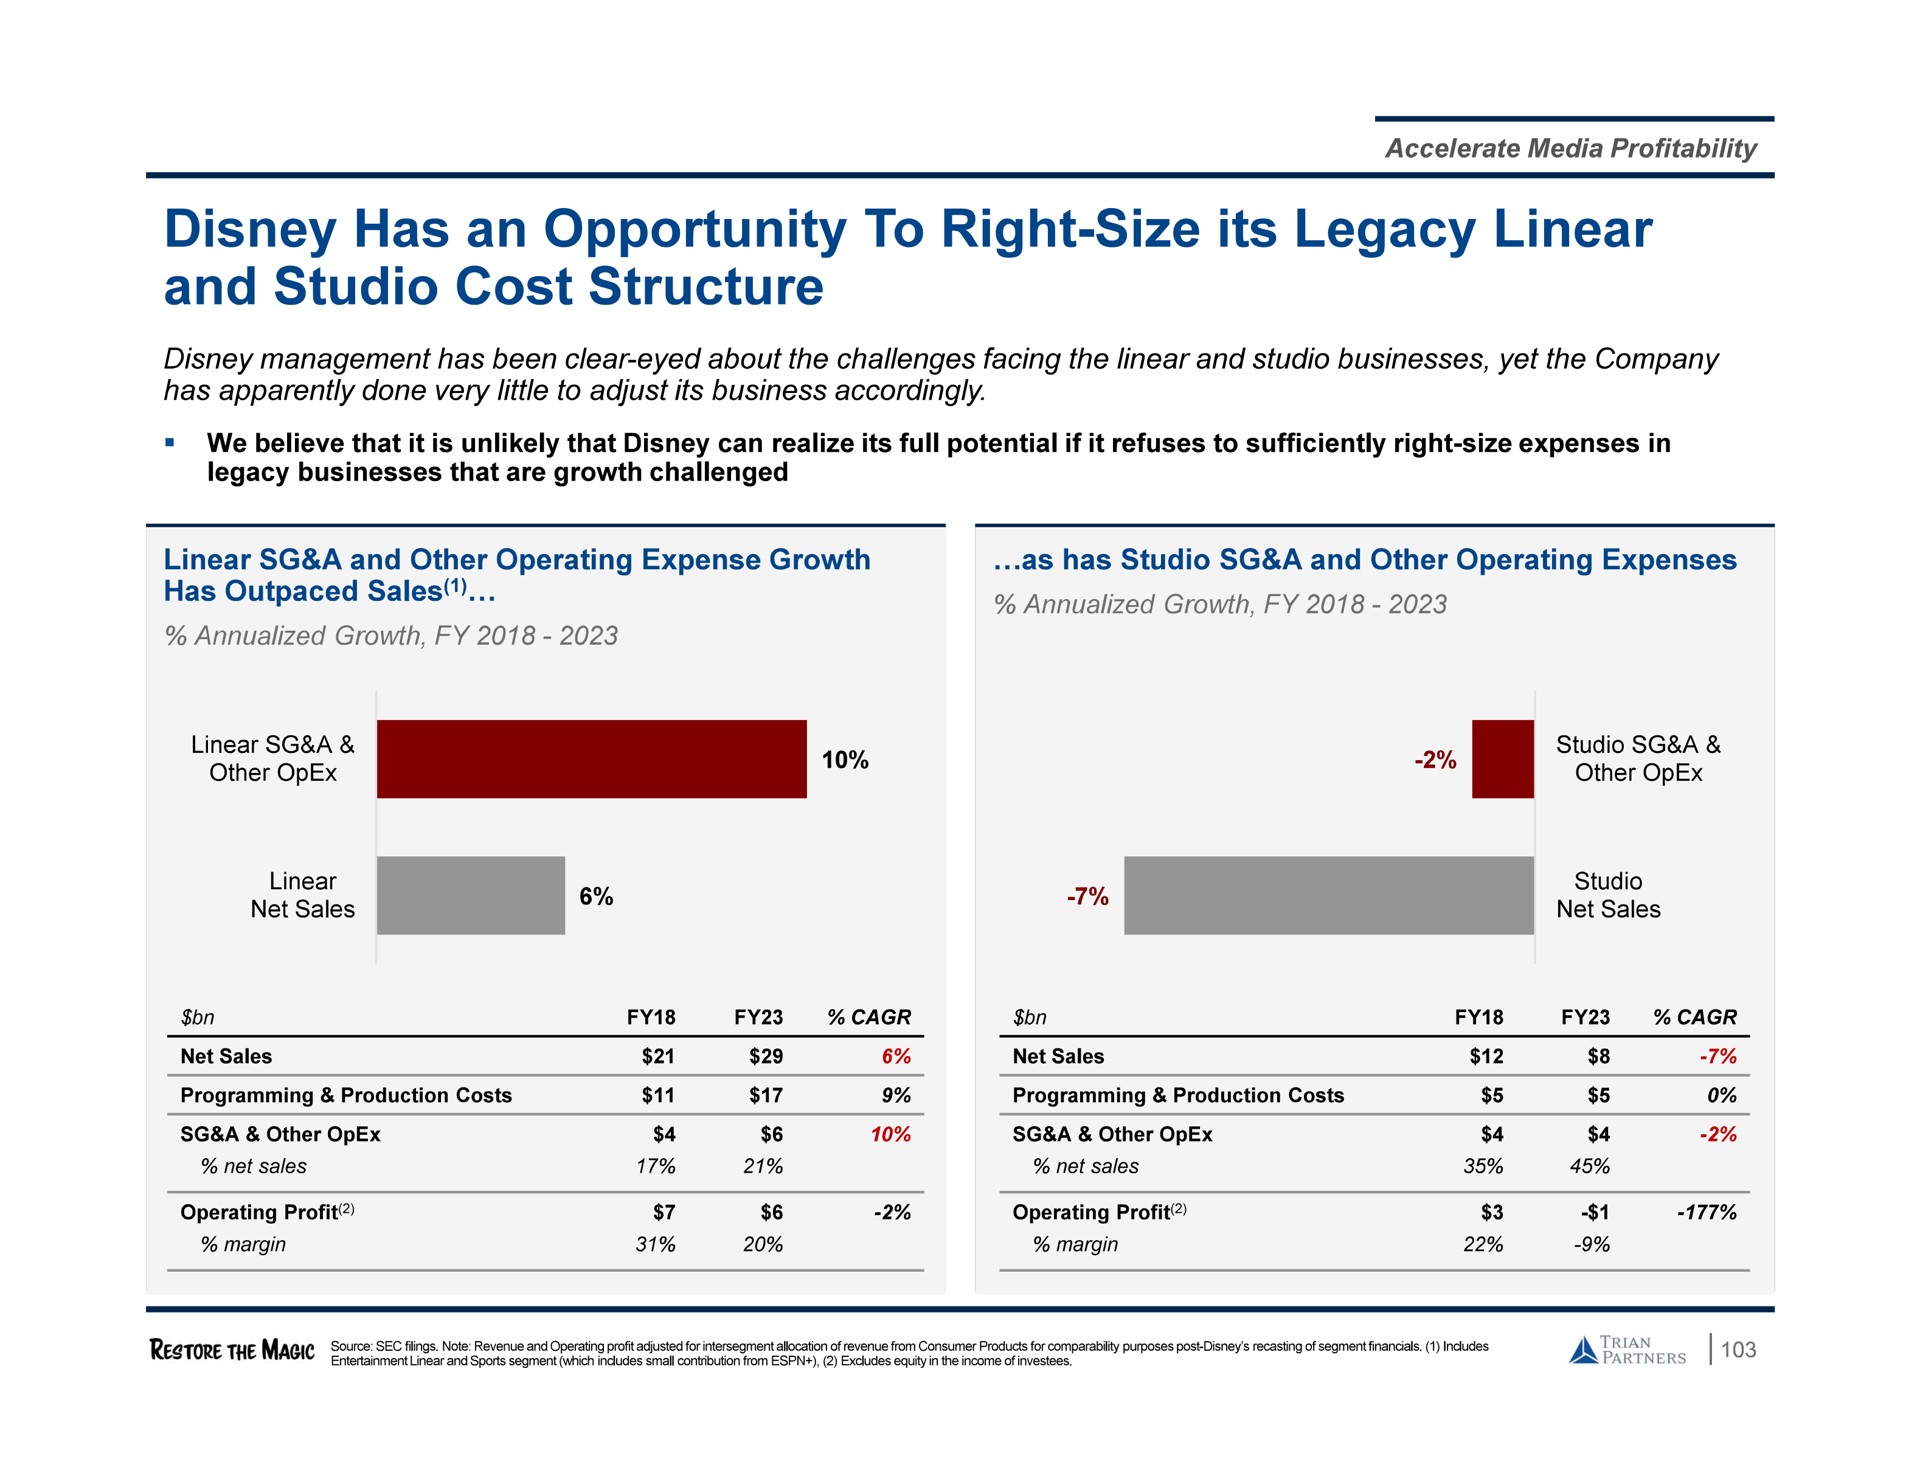 has an opportunity to right size its legacy linear and studio cost structure has outpaced sales growth | Trian Partners